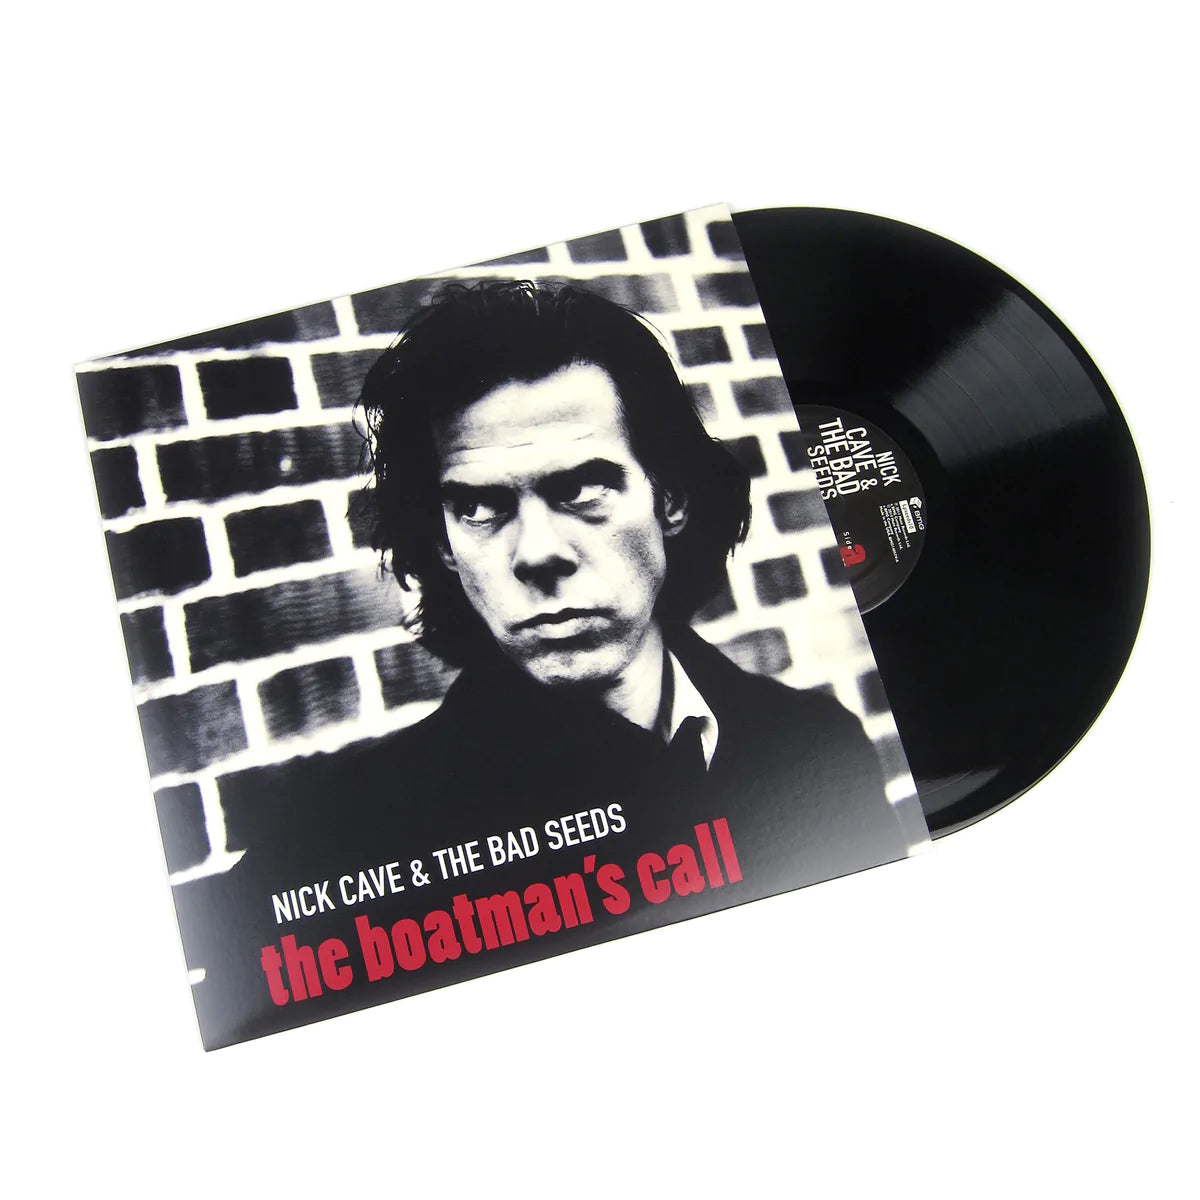 
                  
                    Nick Cave & The Bad Seeds - Boatman's Call
                  
                